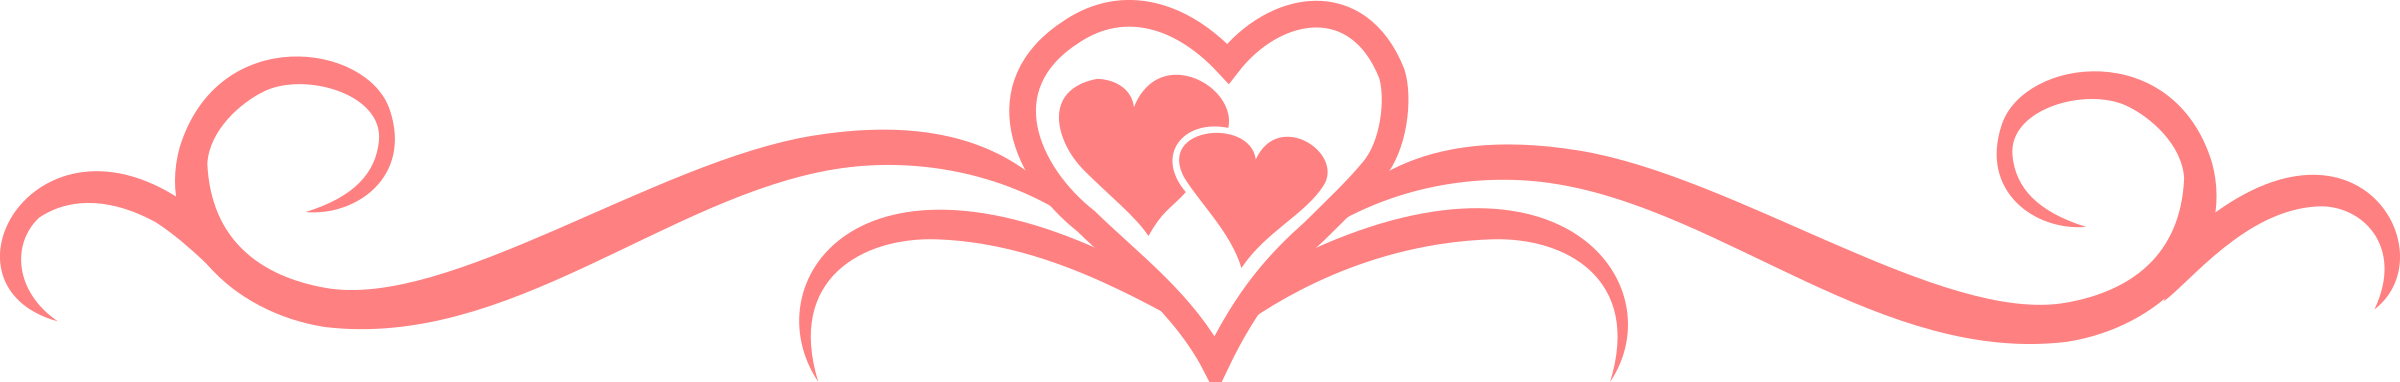 clipart dividers heart